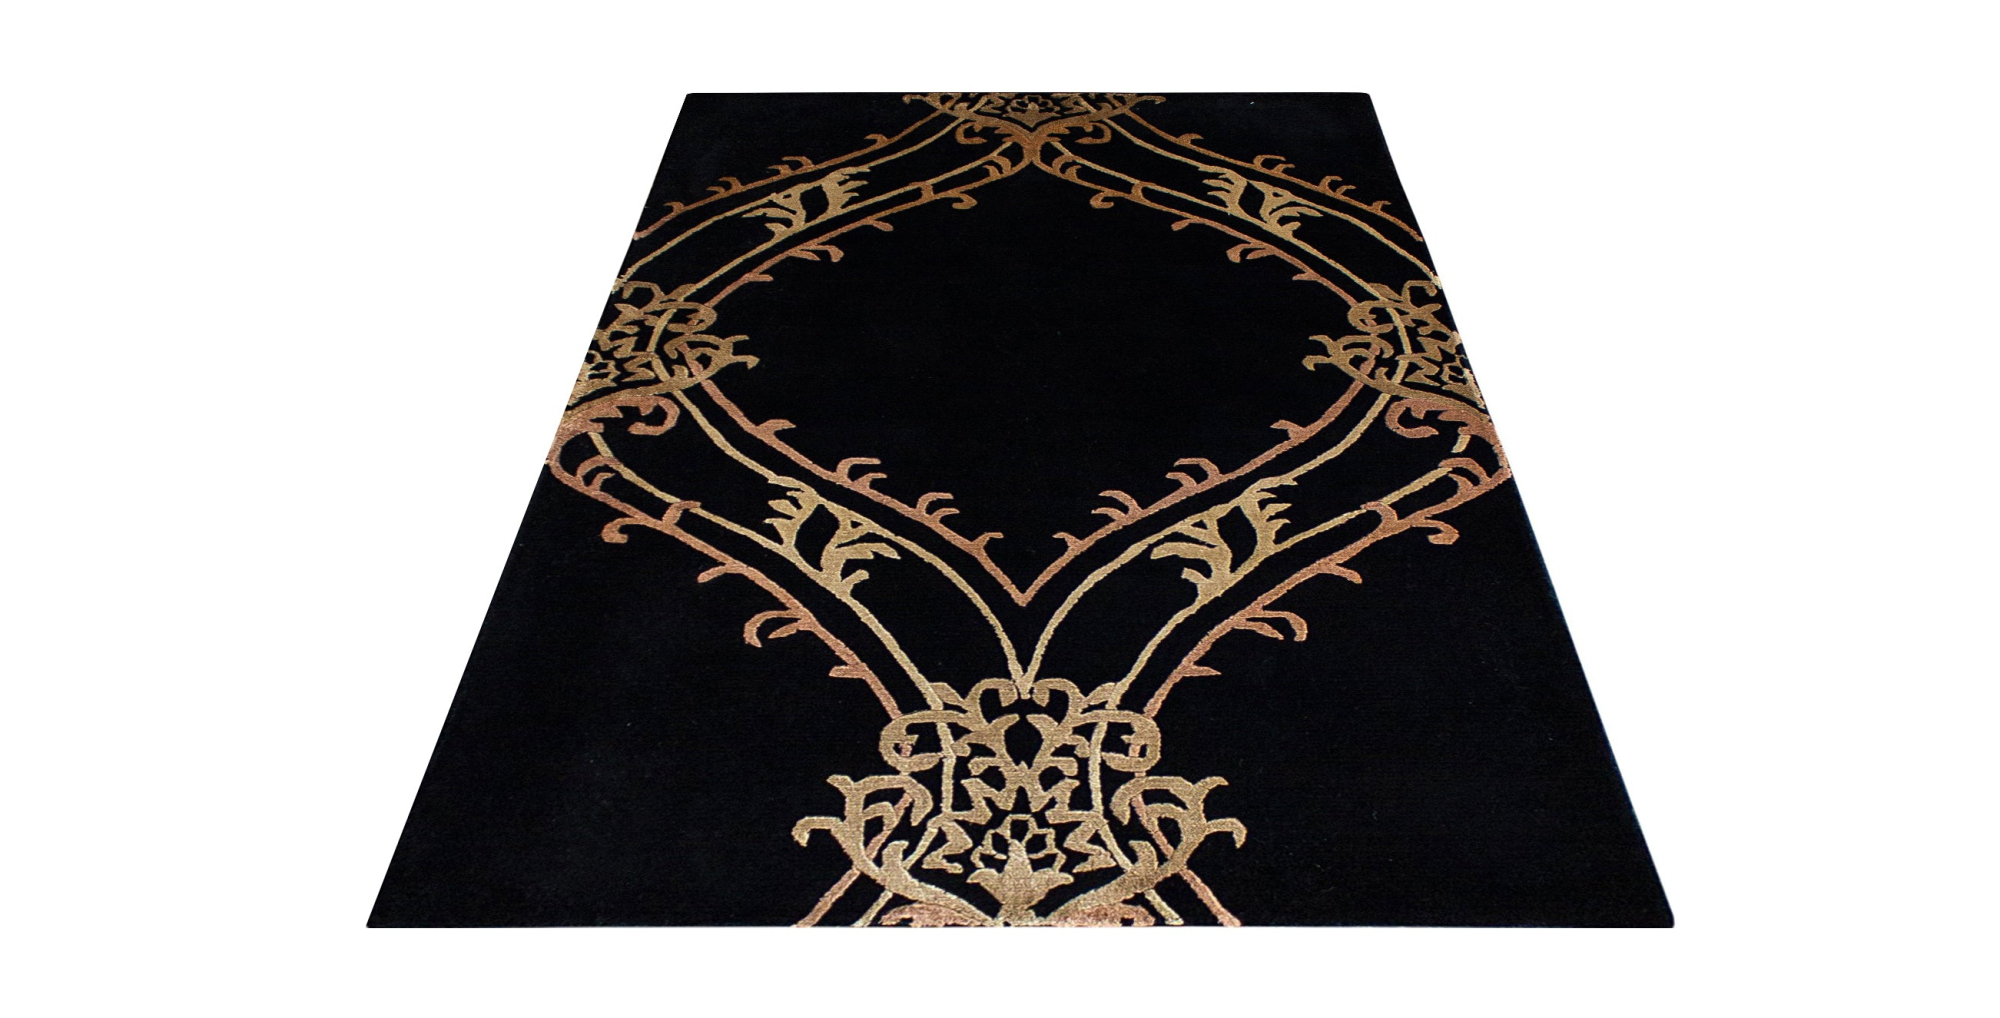 Area rug for living space and any room. Floor decor, rugs and carpets from Tabrizi Rugs. Indo Nepal Demask - Multiple Sizes. Canada's most trusted website to buy rugs online.